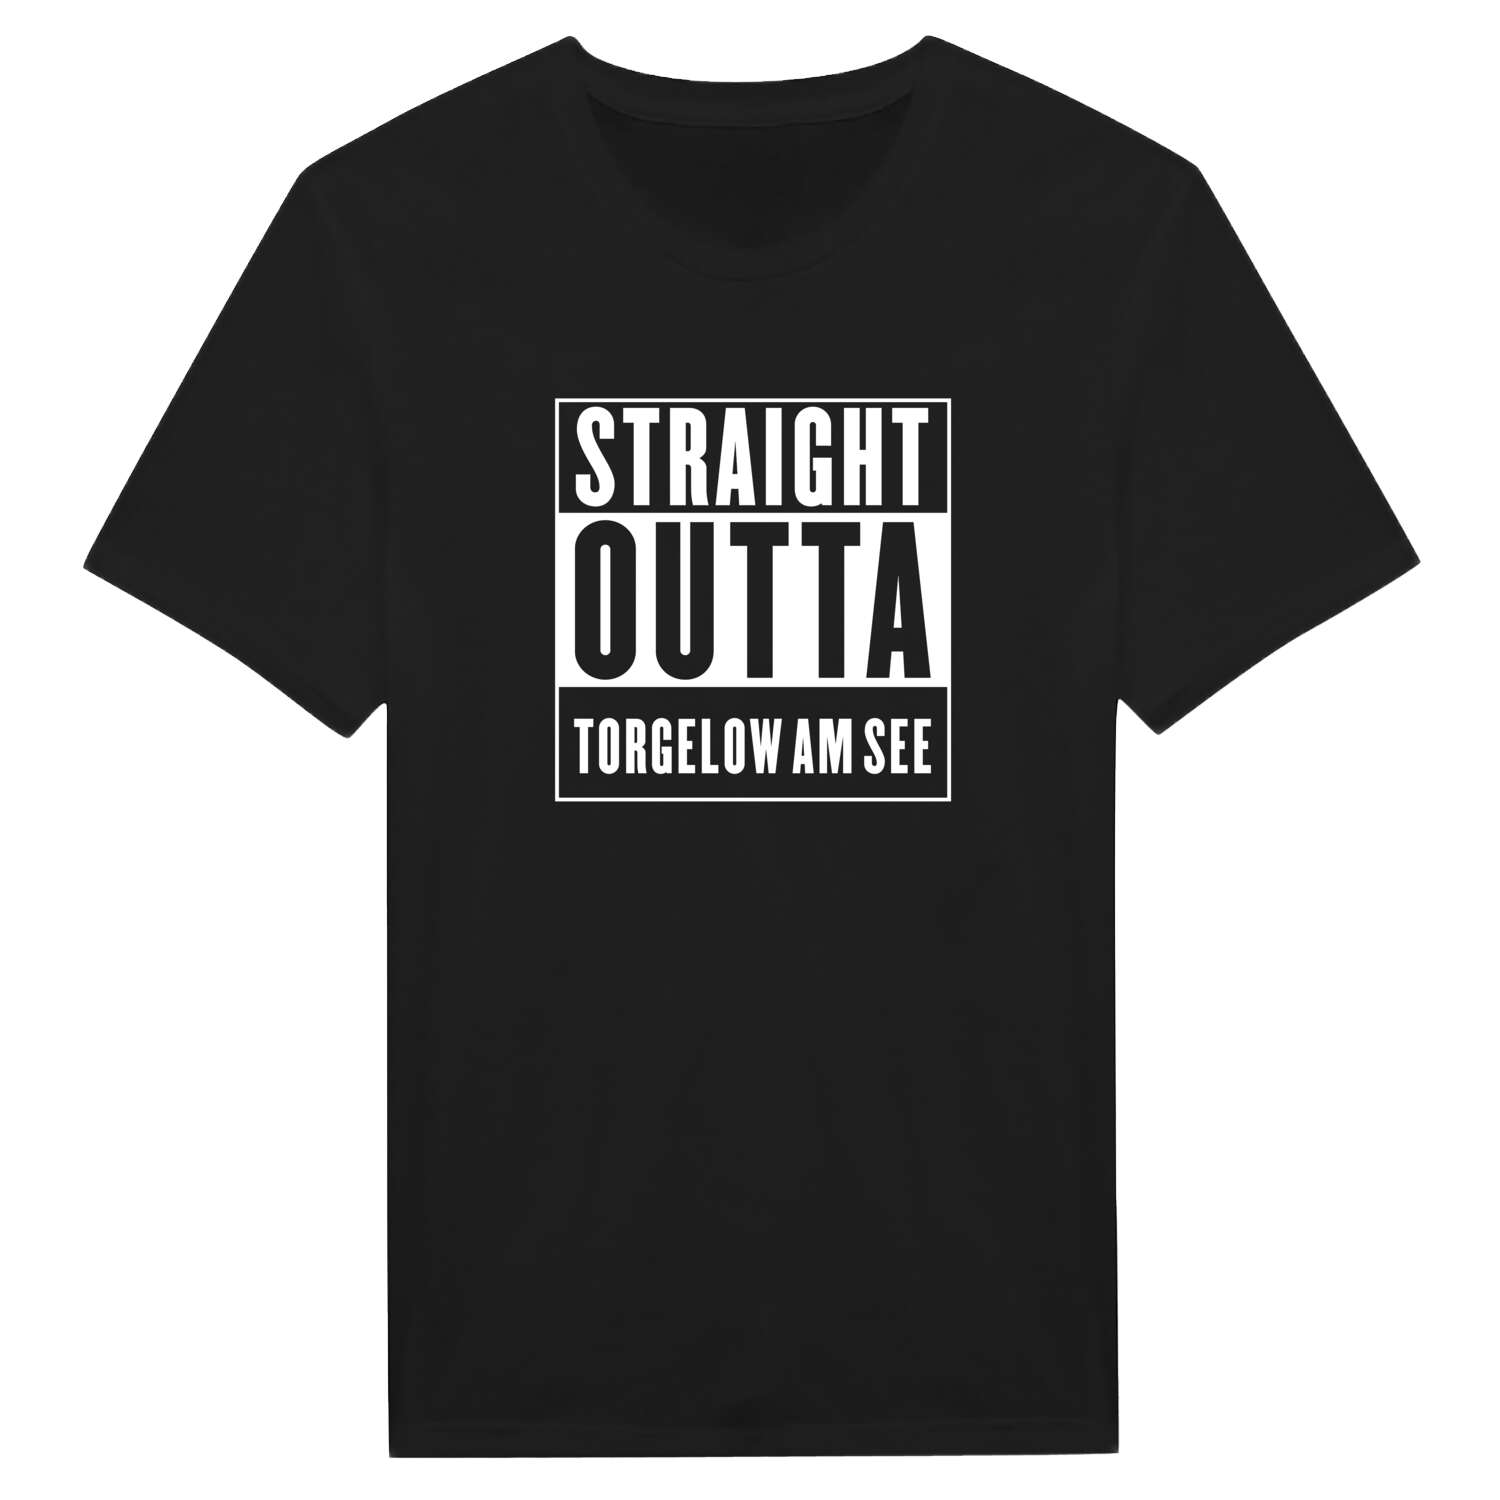 Torgelow am See T-Shirt »Straight Outta«